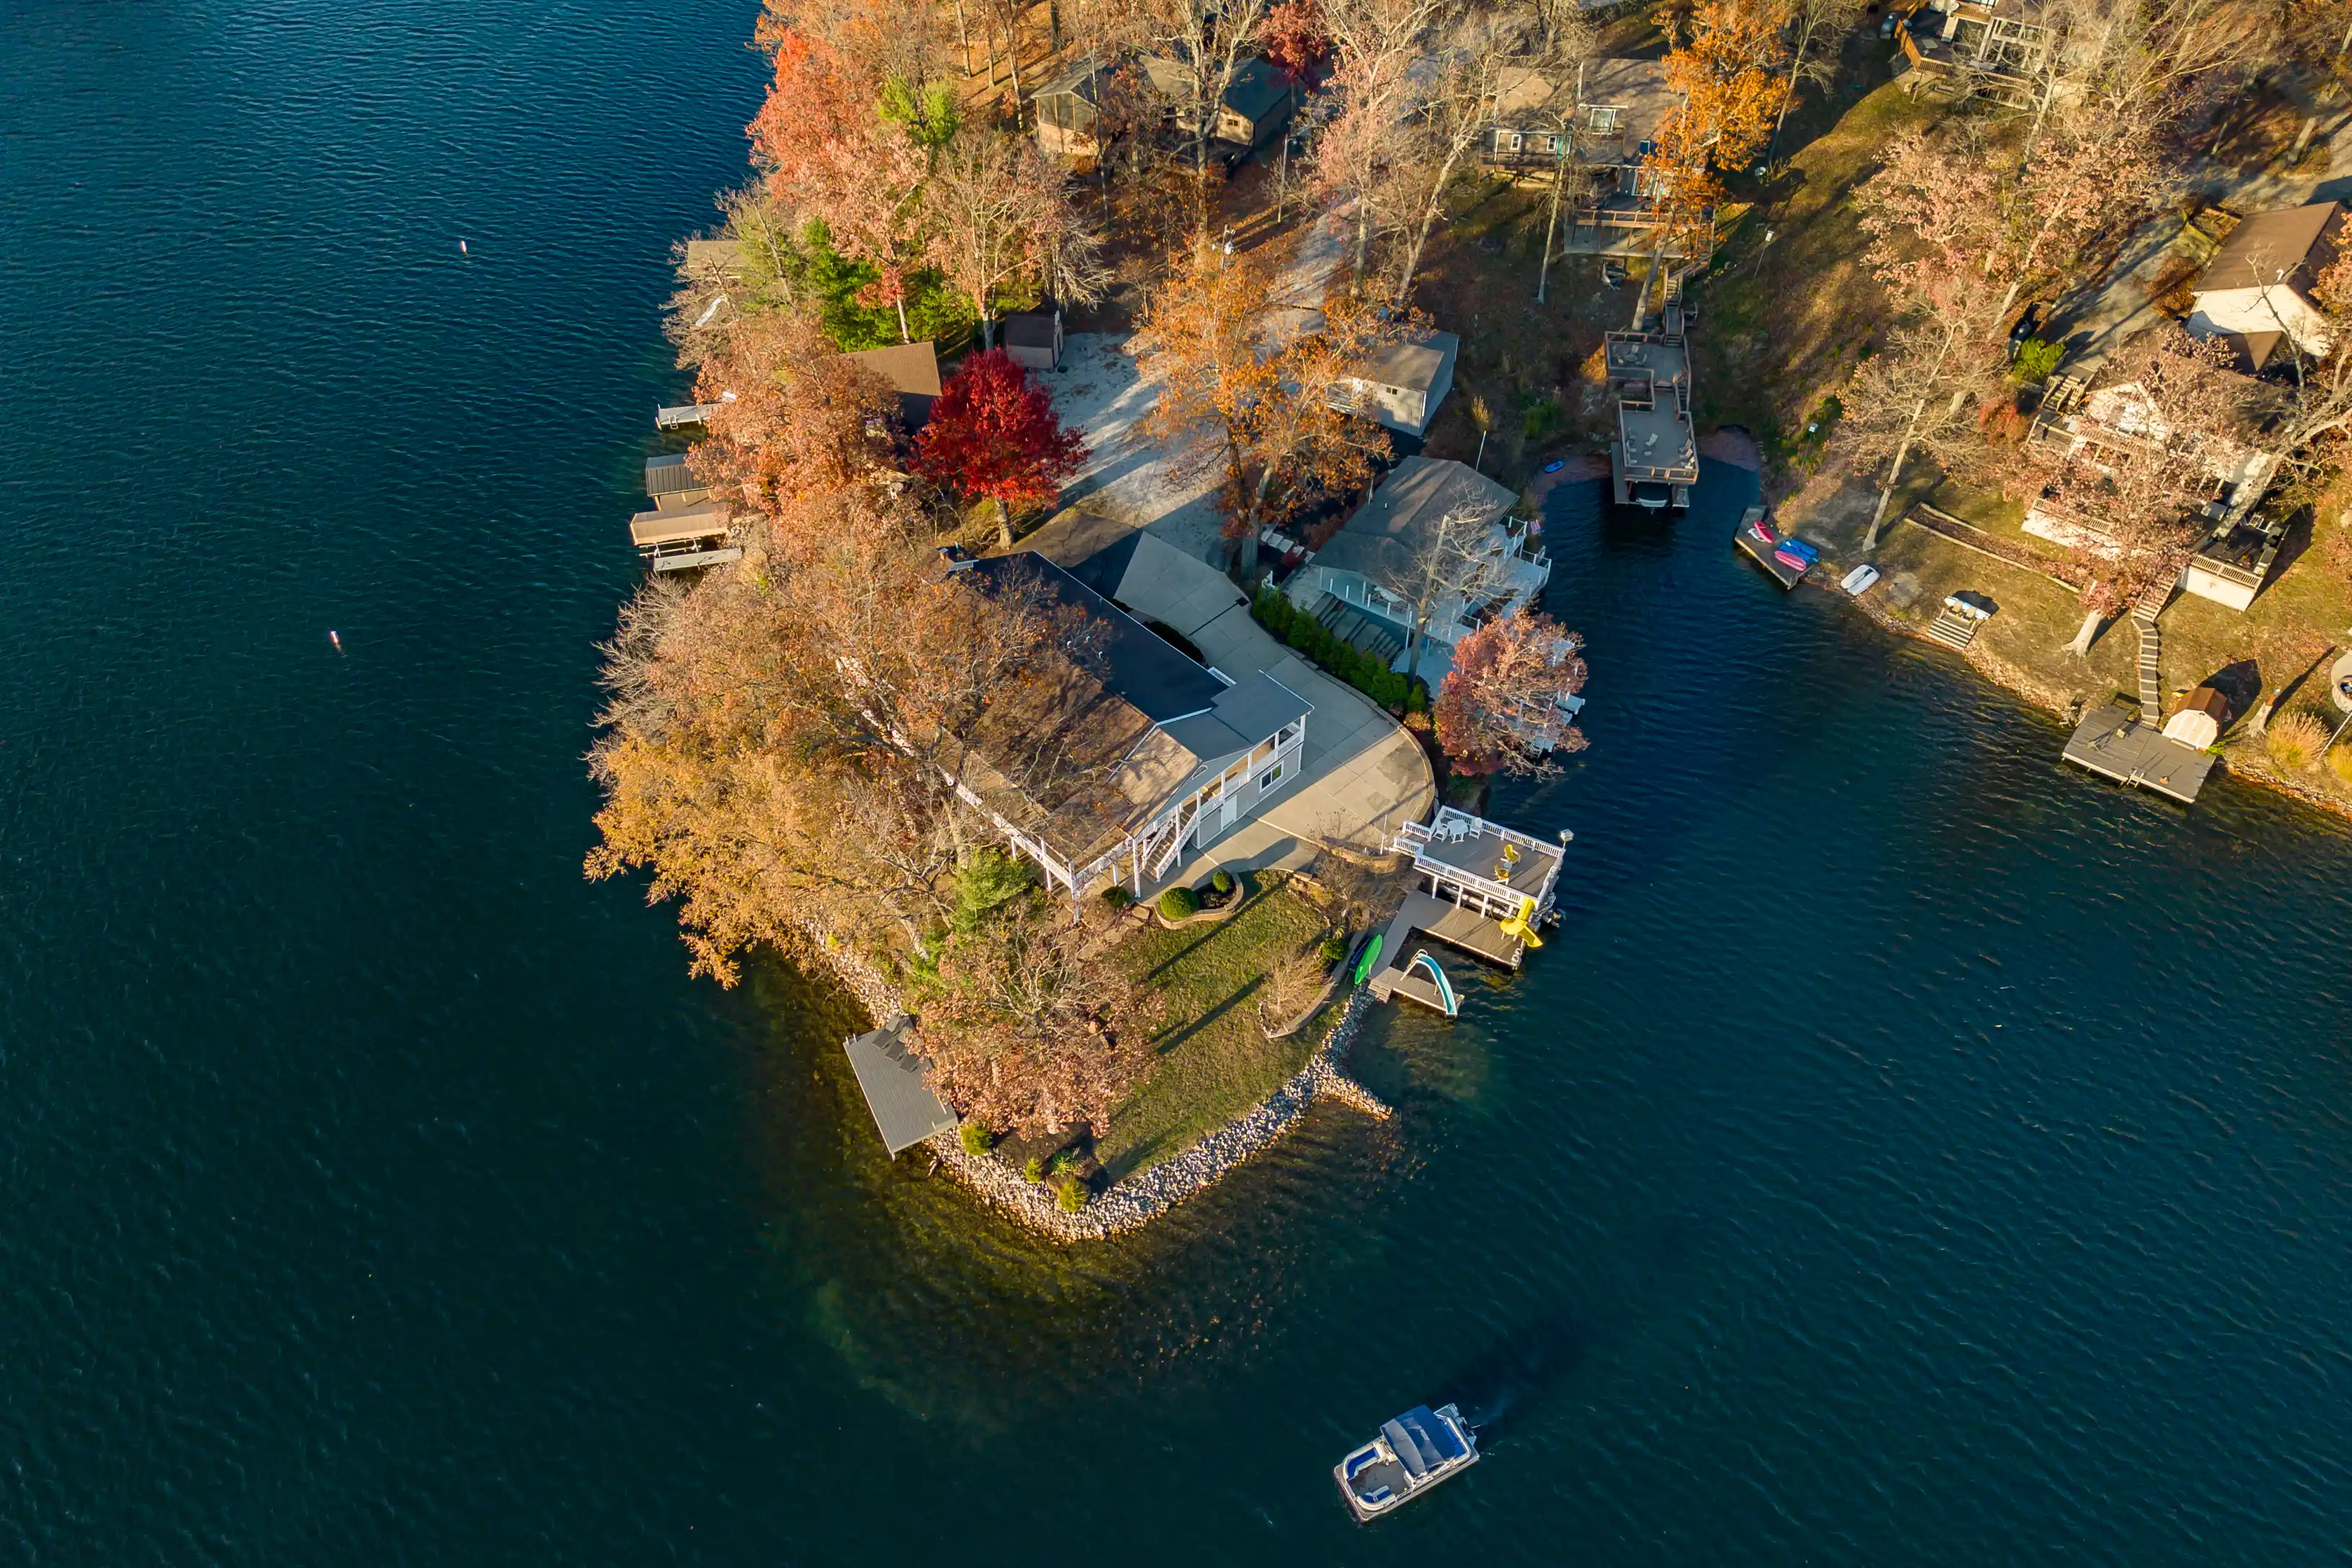 Aerial view of a lakeside residential area with autumnal trees and docks, with a boat cruising on the water.